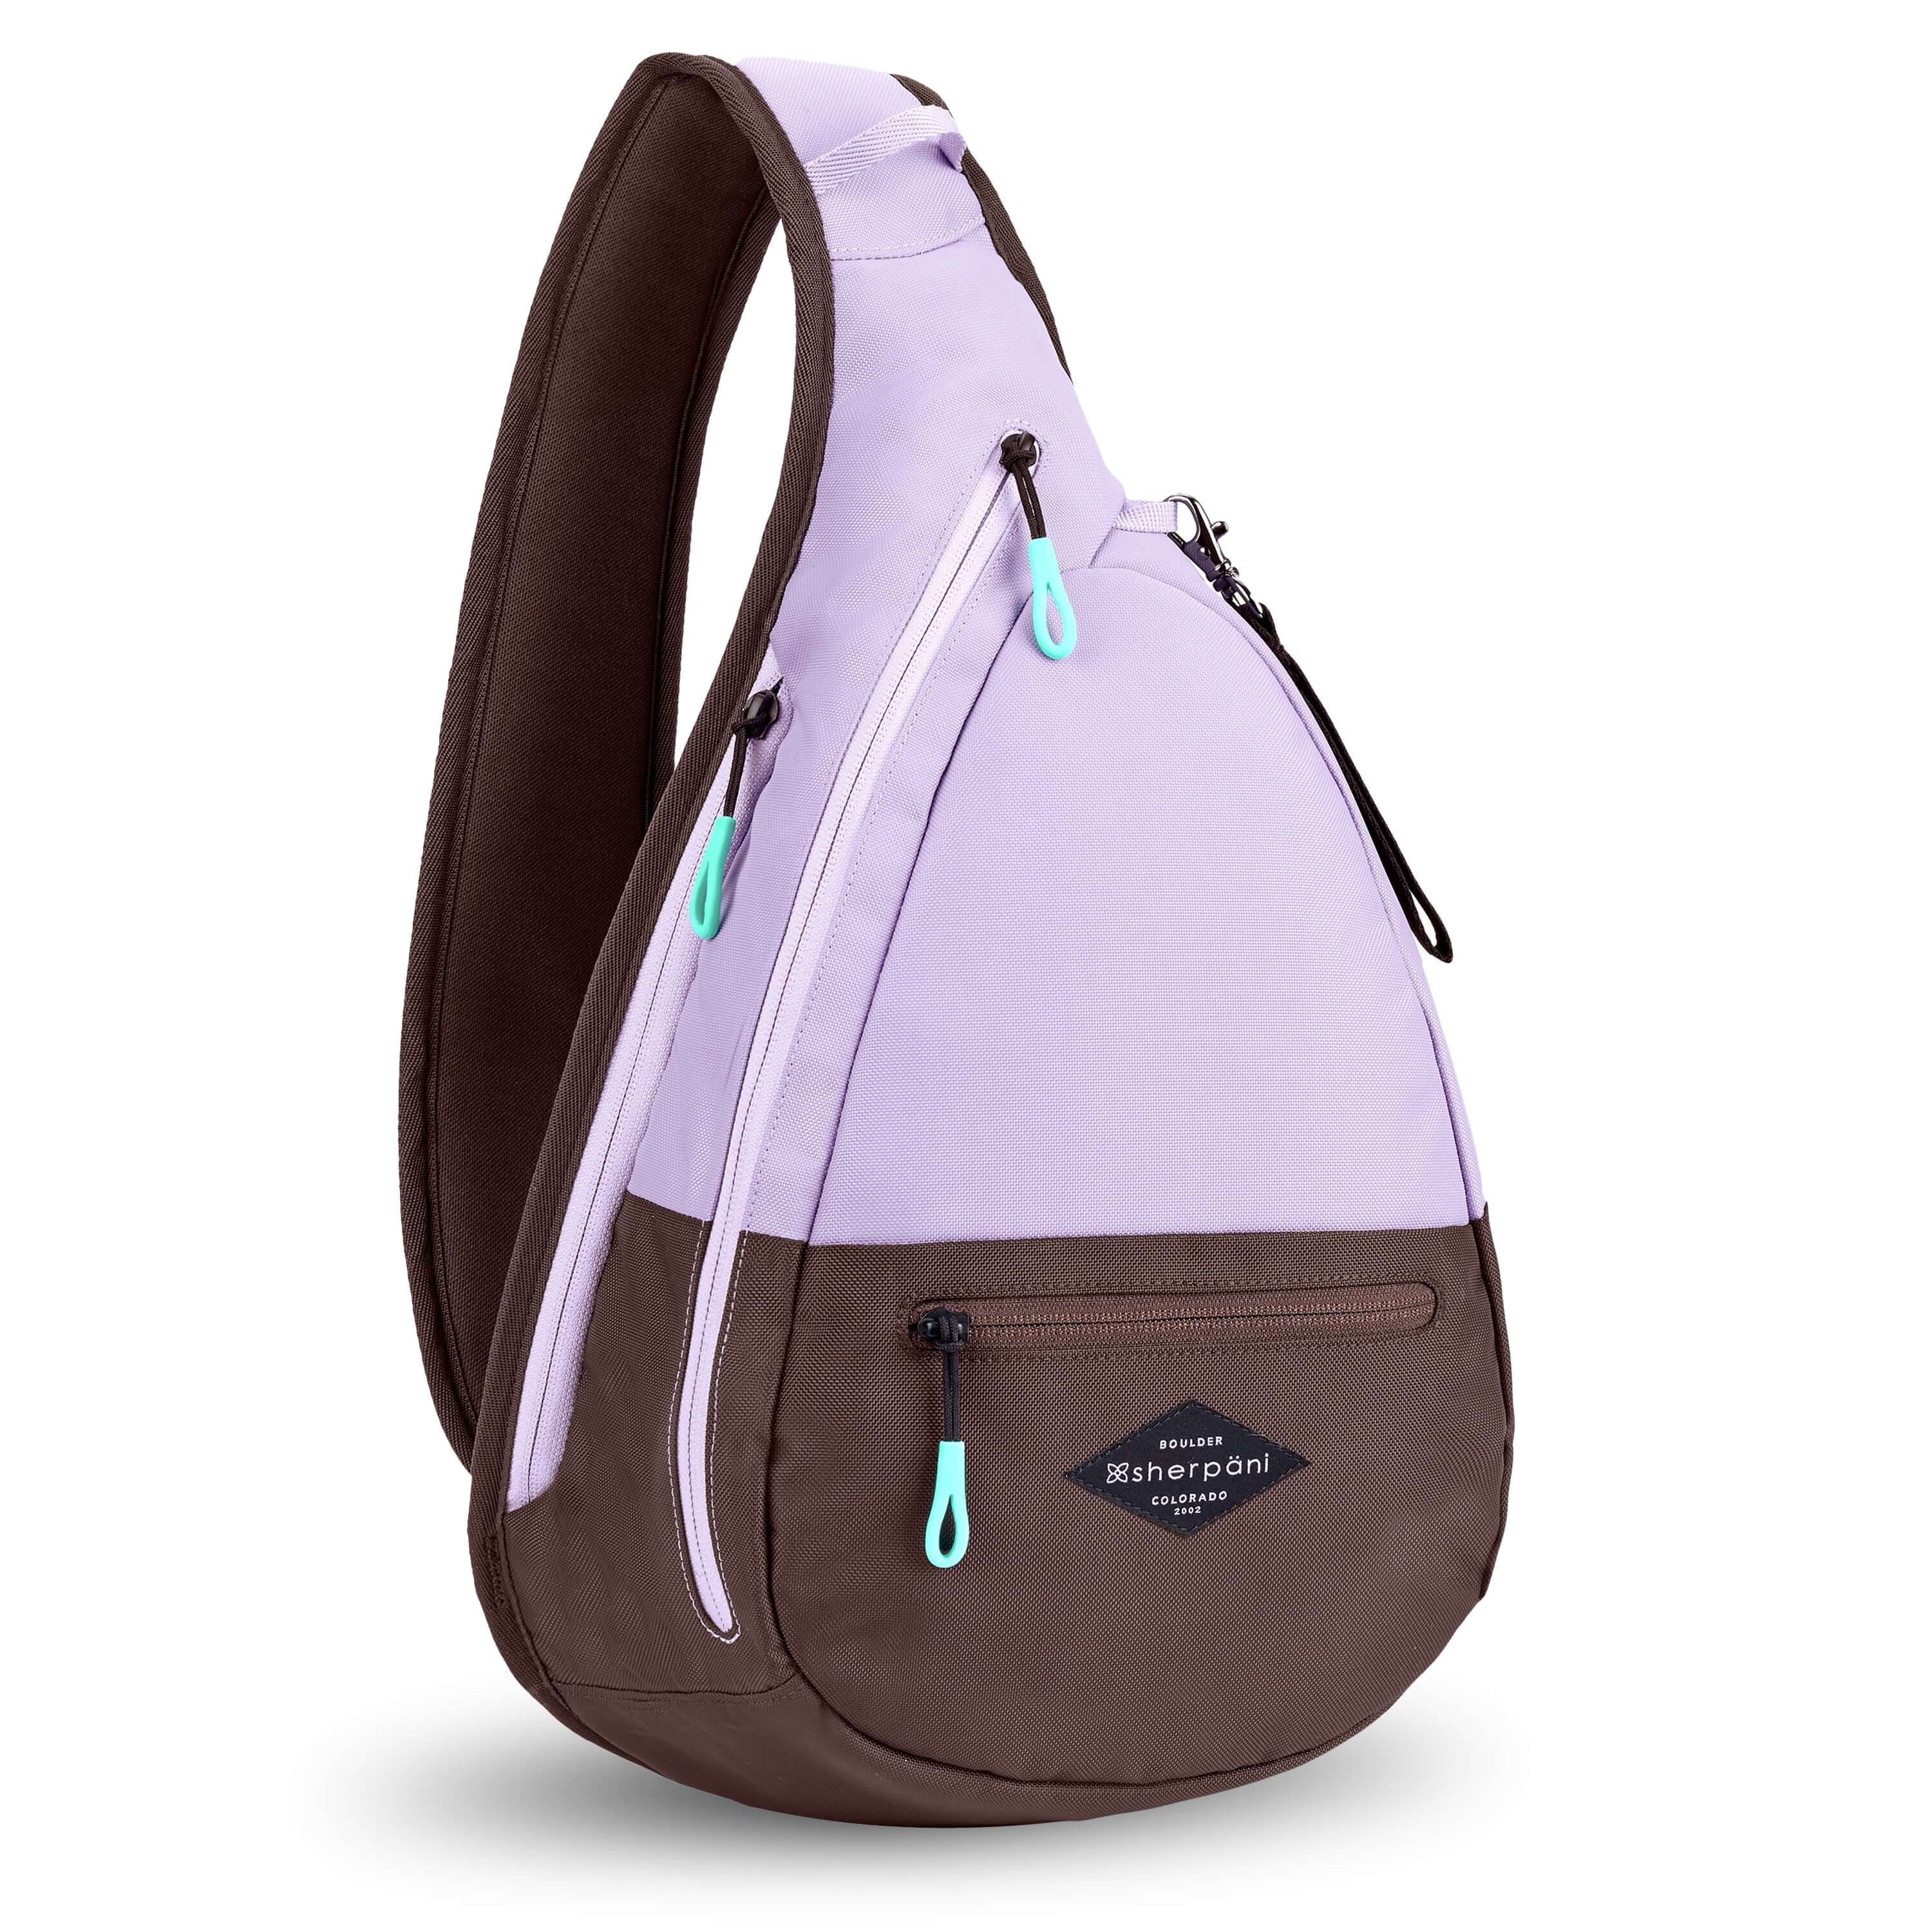 Angled front view of Sherpani's bag, the Esprit in Lavender. The teardrop shaped bag is two-toned in lavender and brown. There is a small zipper pocket on the front of the bag, the main zipper compartment in the middle, and another zipper pocket towards the back of the bag. It has easy-pull zippers accented in aqua. A branded Sherpani keychain is clipped to a fabric loop near the top of the bag. 